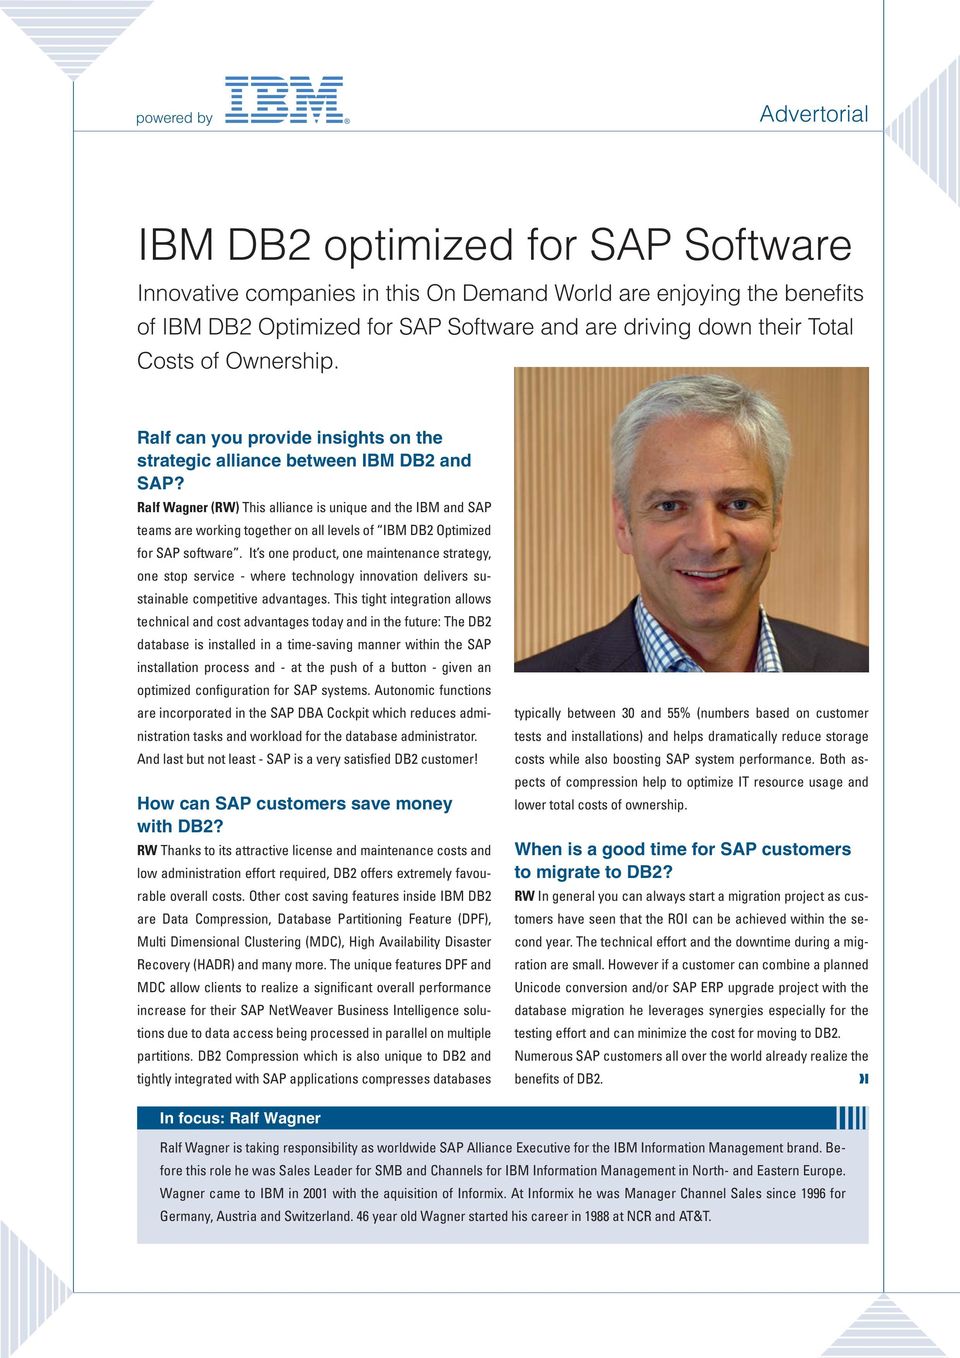 Ralf Wagner (RW) This alliance is unique and the IBM and SAP teams are working together on all levels of IBM DB2 Optimized for SAP software.